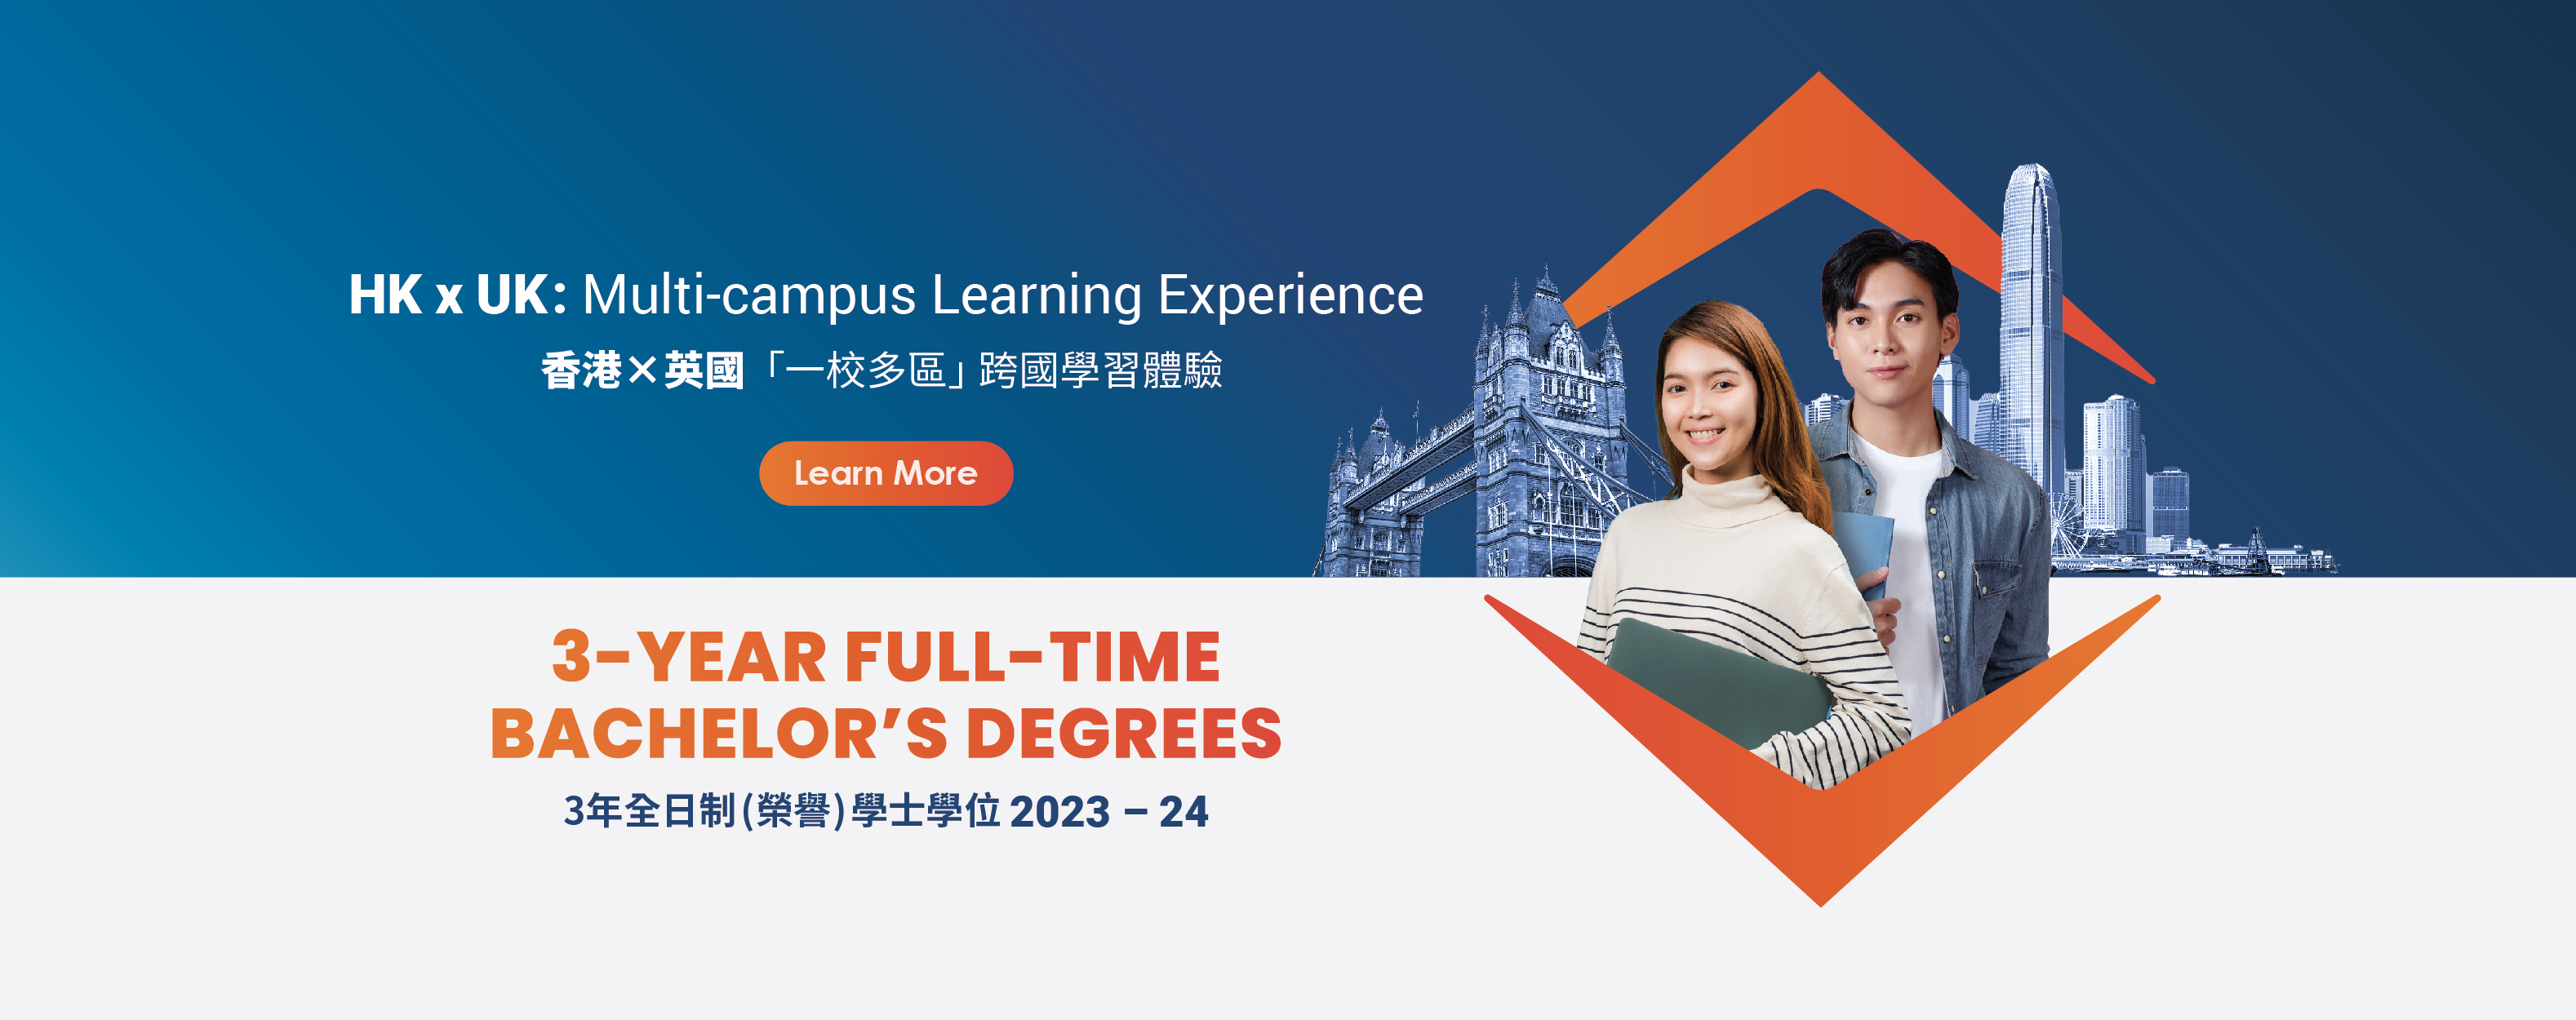 Banner for HK x UK: Multi-campus Learning Experience, 3-year full-time bachelor's degrees.